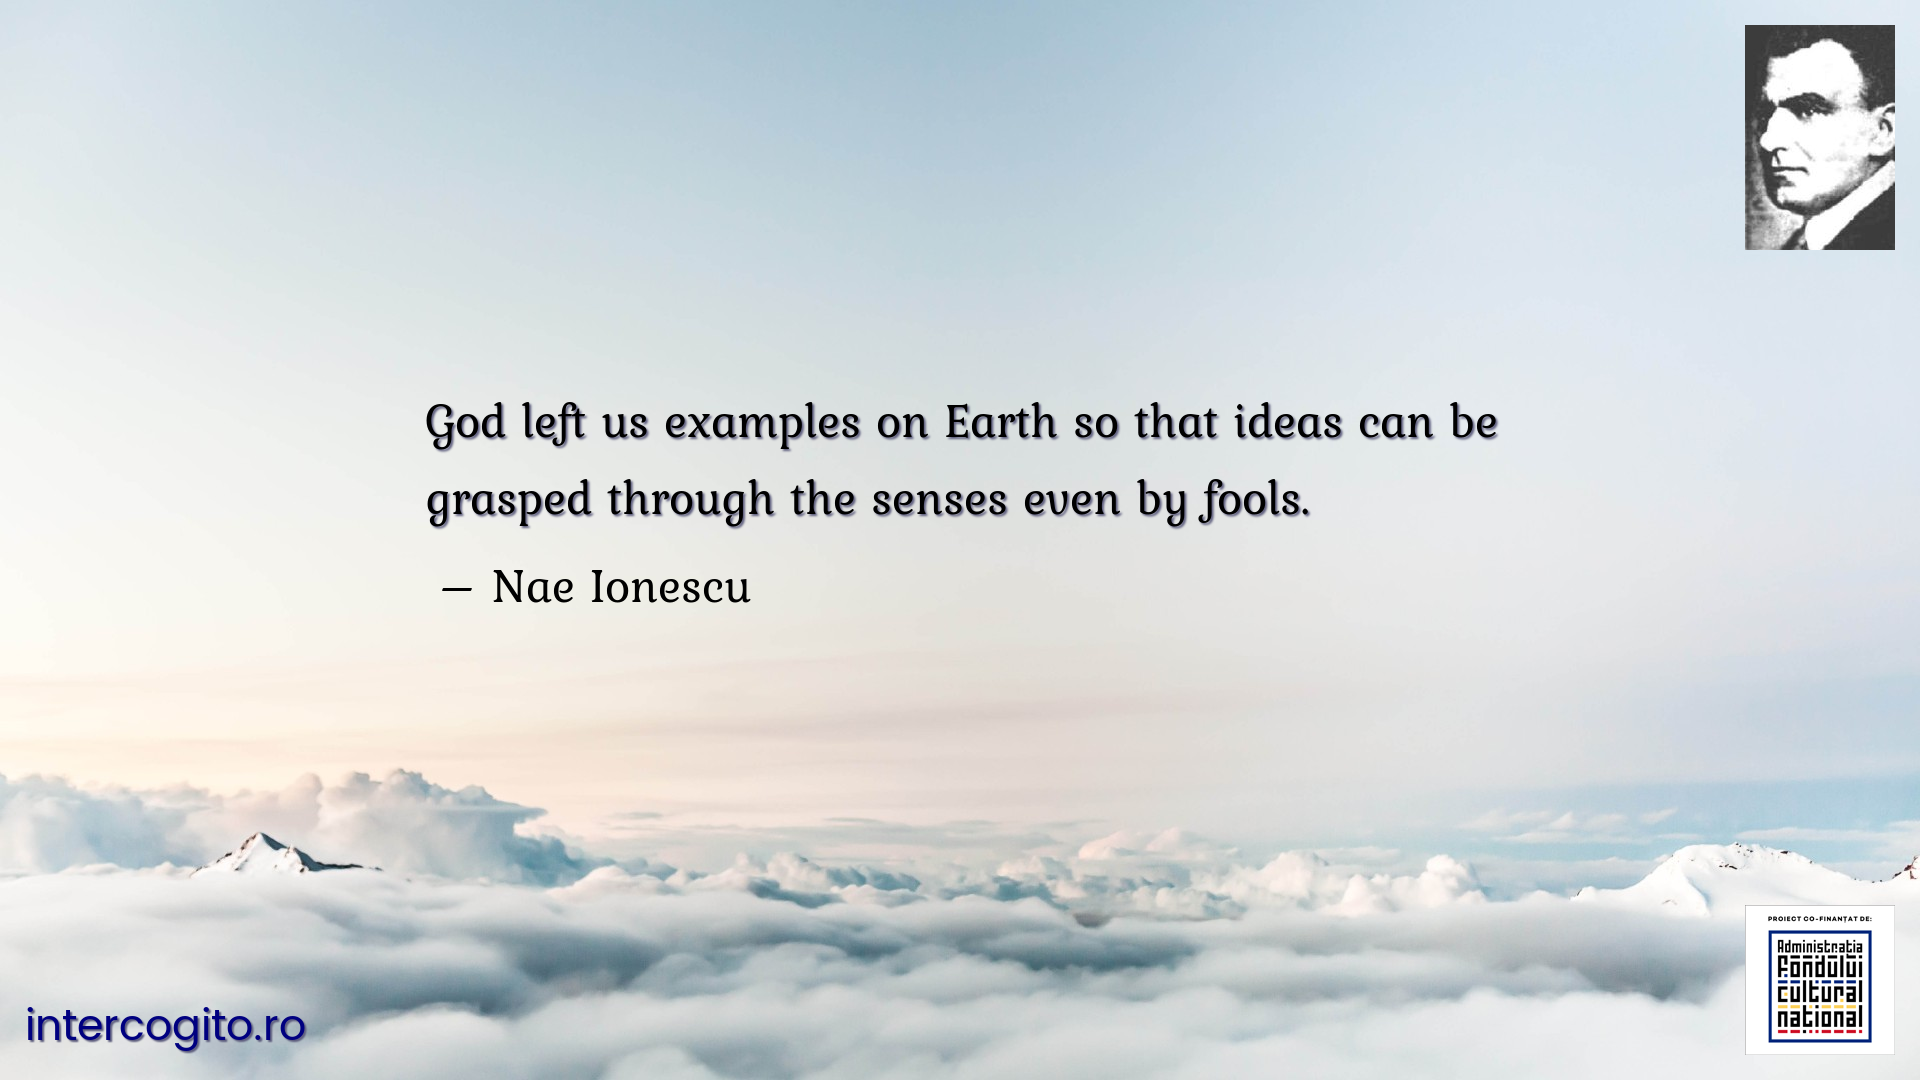 God left us examples on Earth so that ideas can be grasped through the senses even by fools.